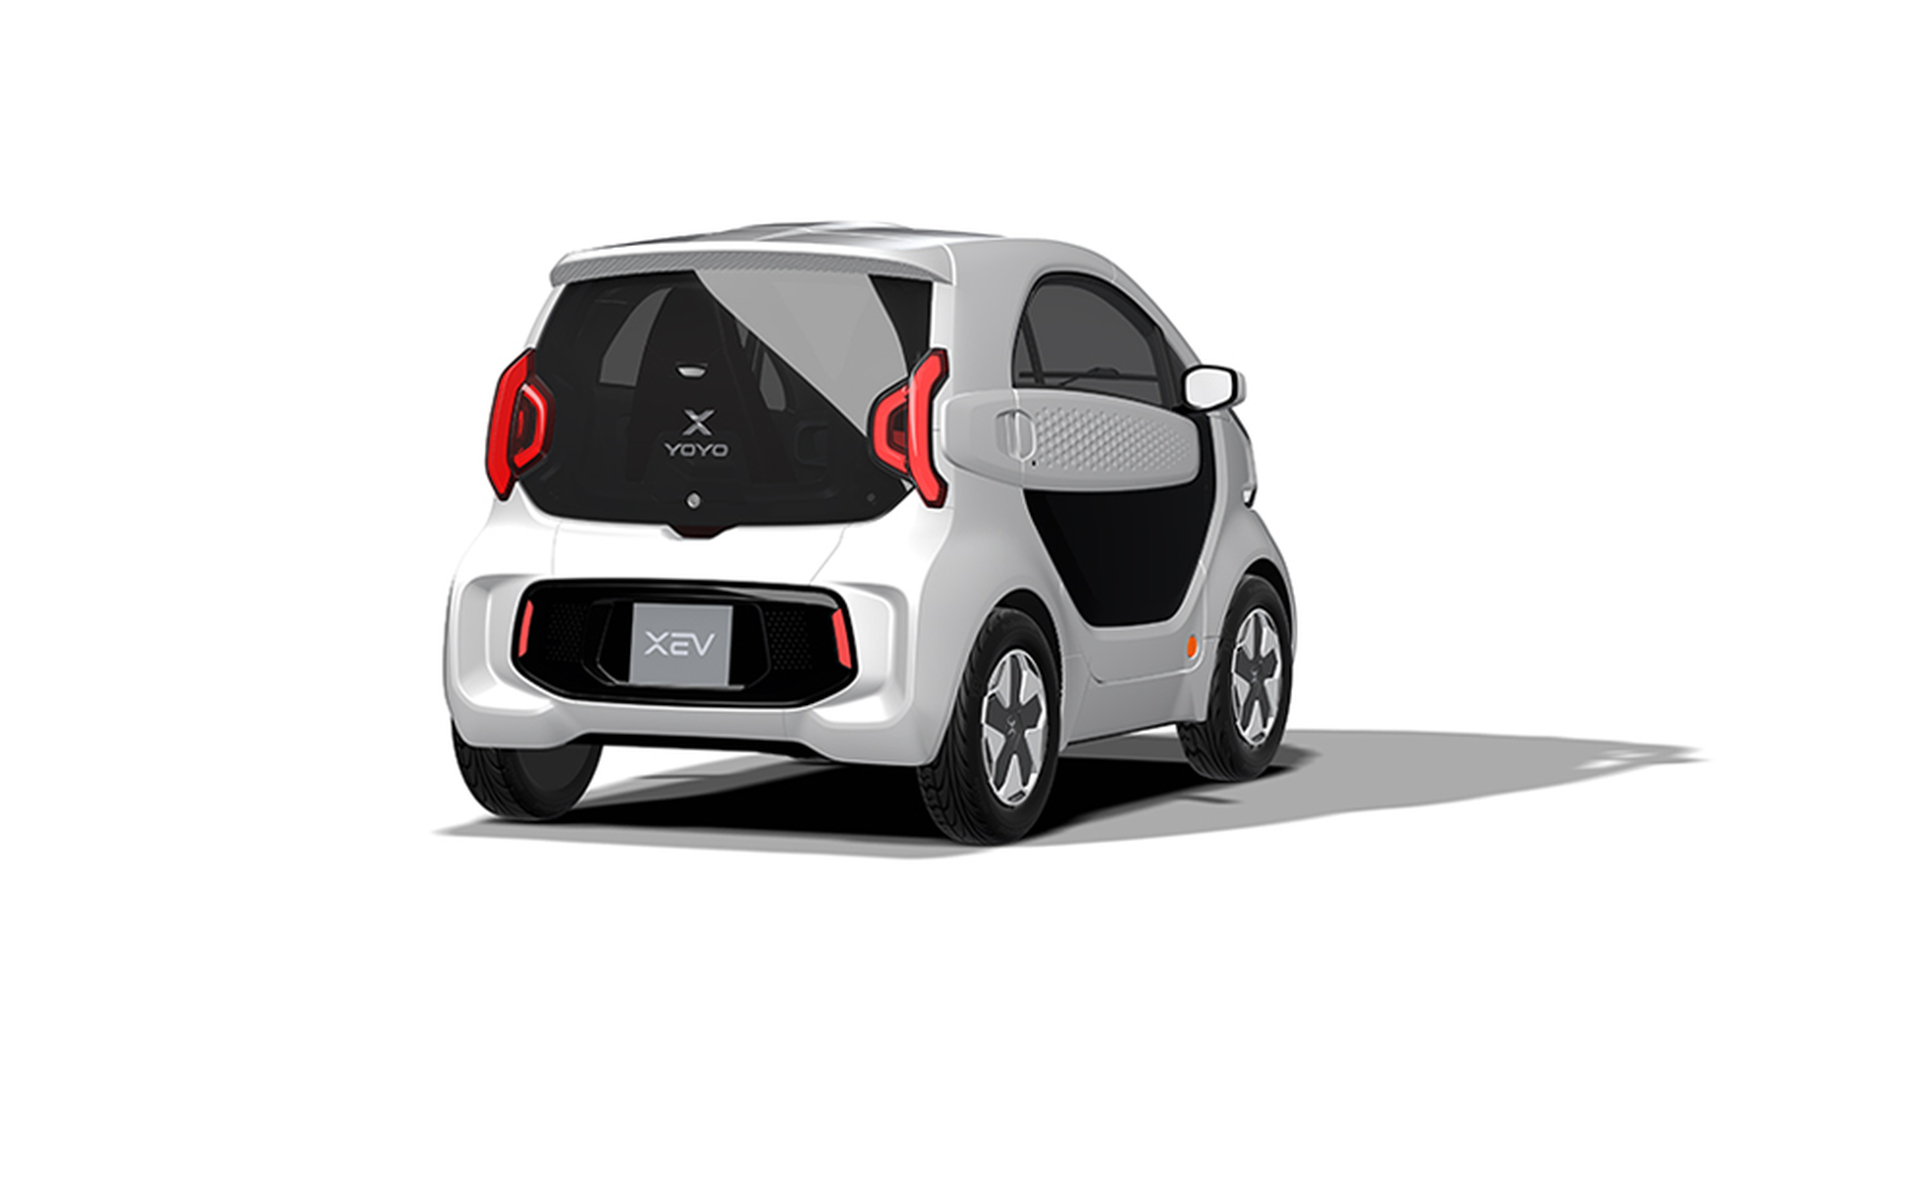 The XEV Yoyo is a small electric city car for 13,000 euros